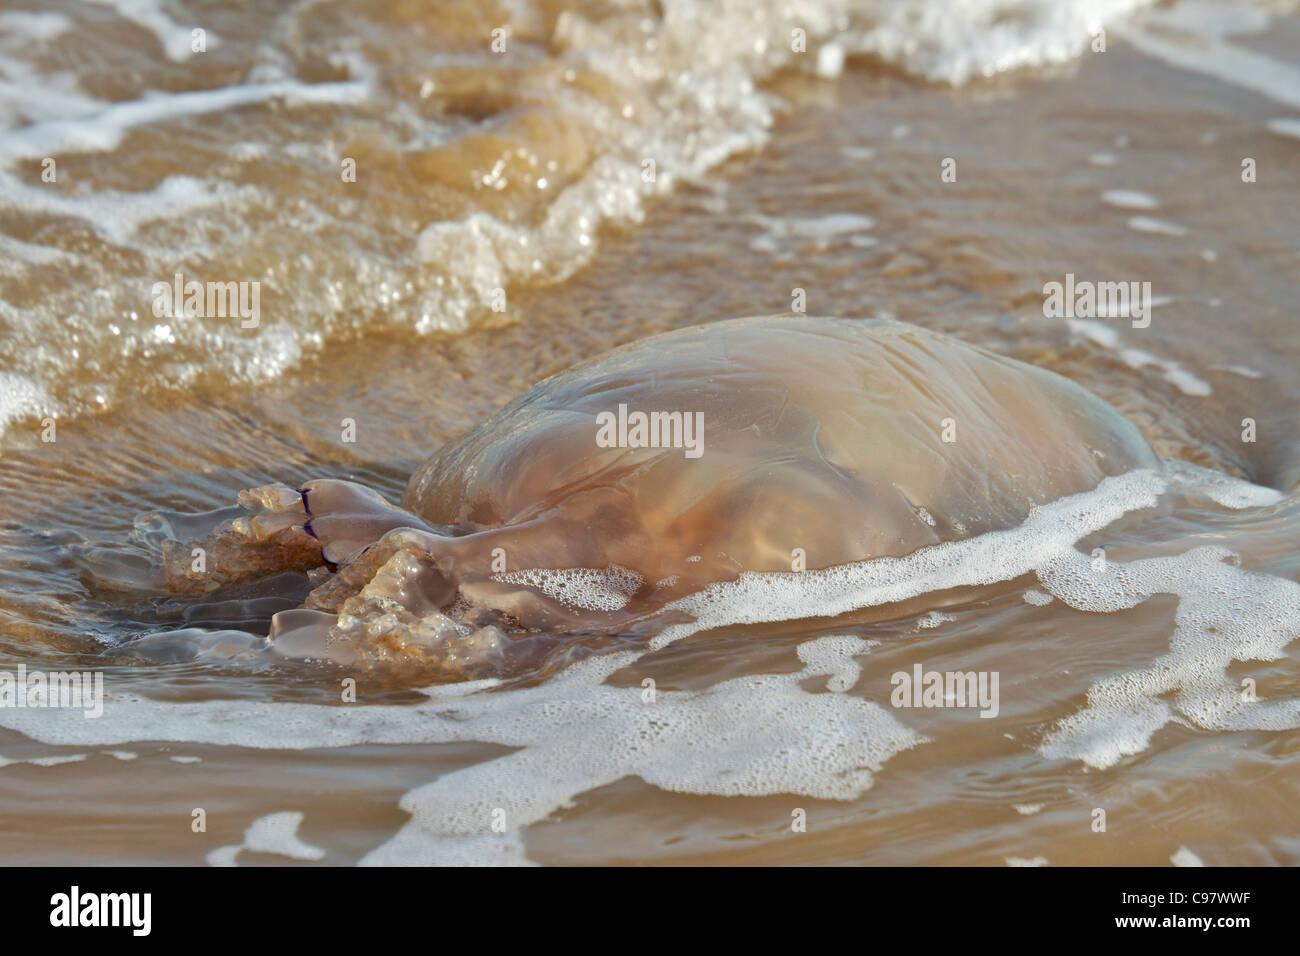 Barrel Jellyfish stranded on shore at New Brighton after recent High winds and tides, Merseyside, England UK. February 2011 Stock Photo